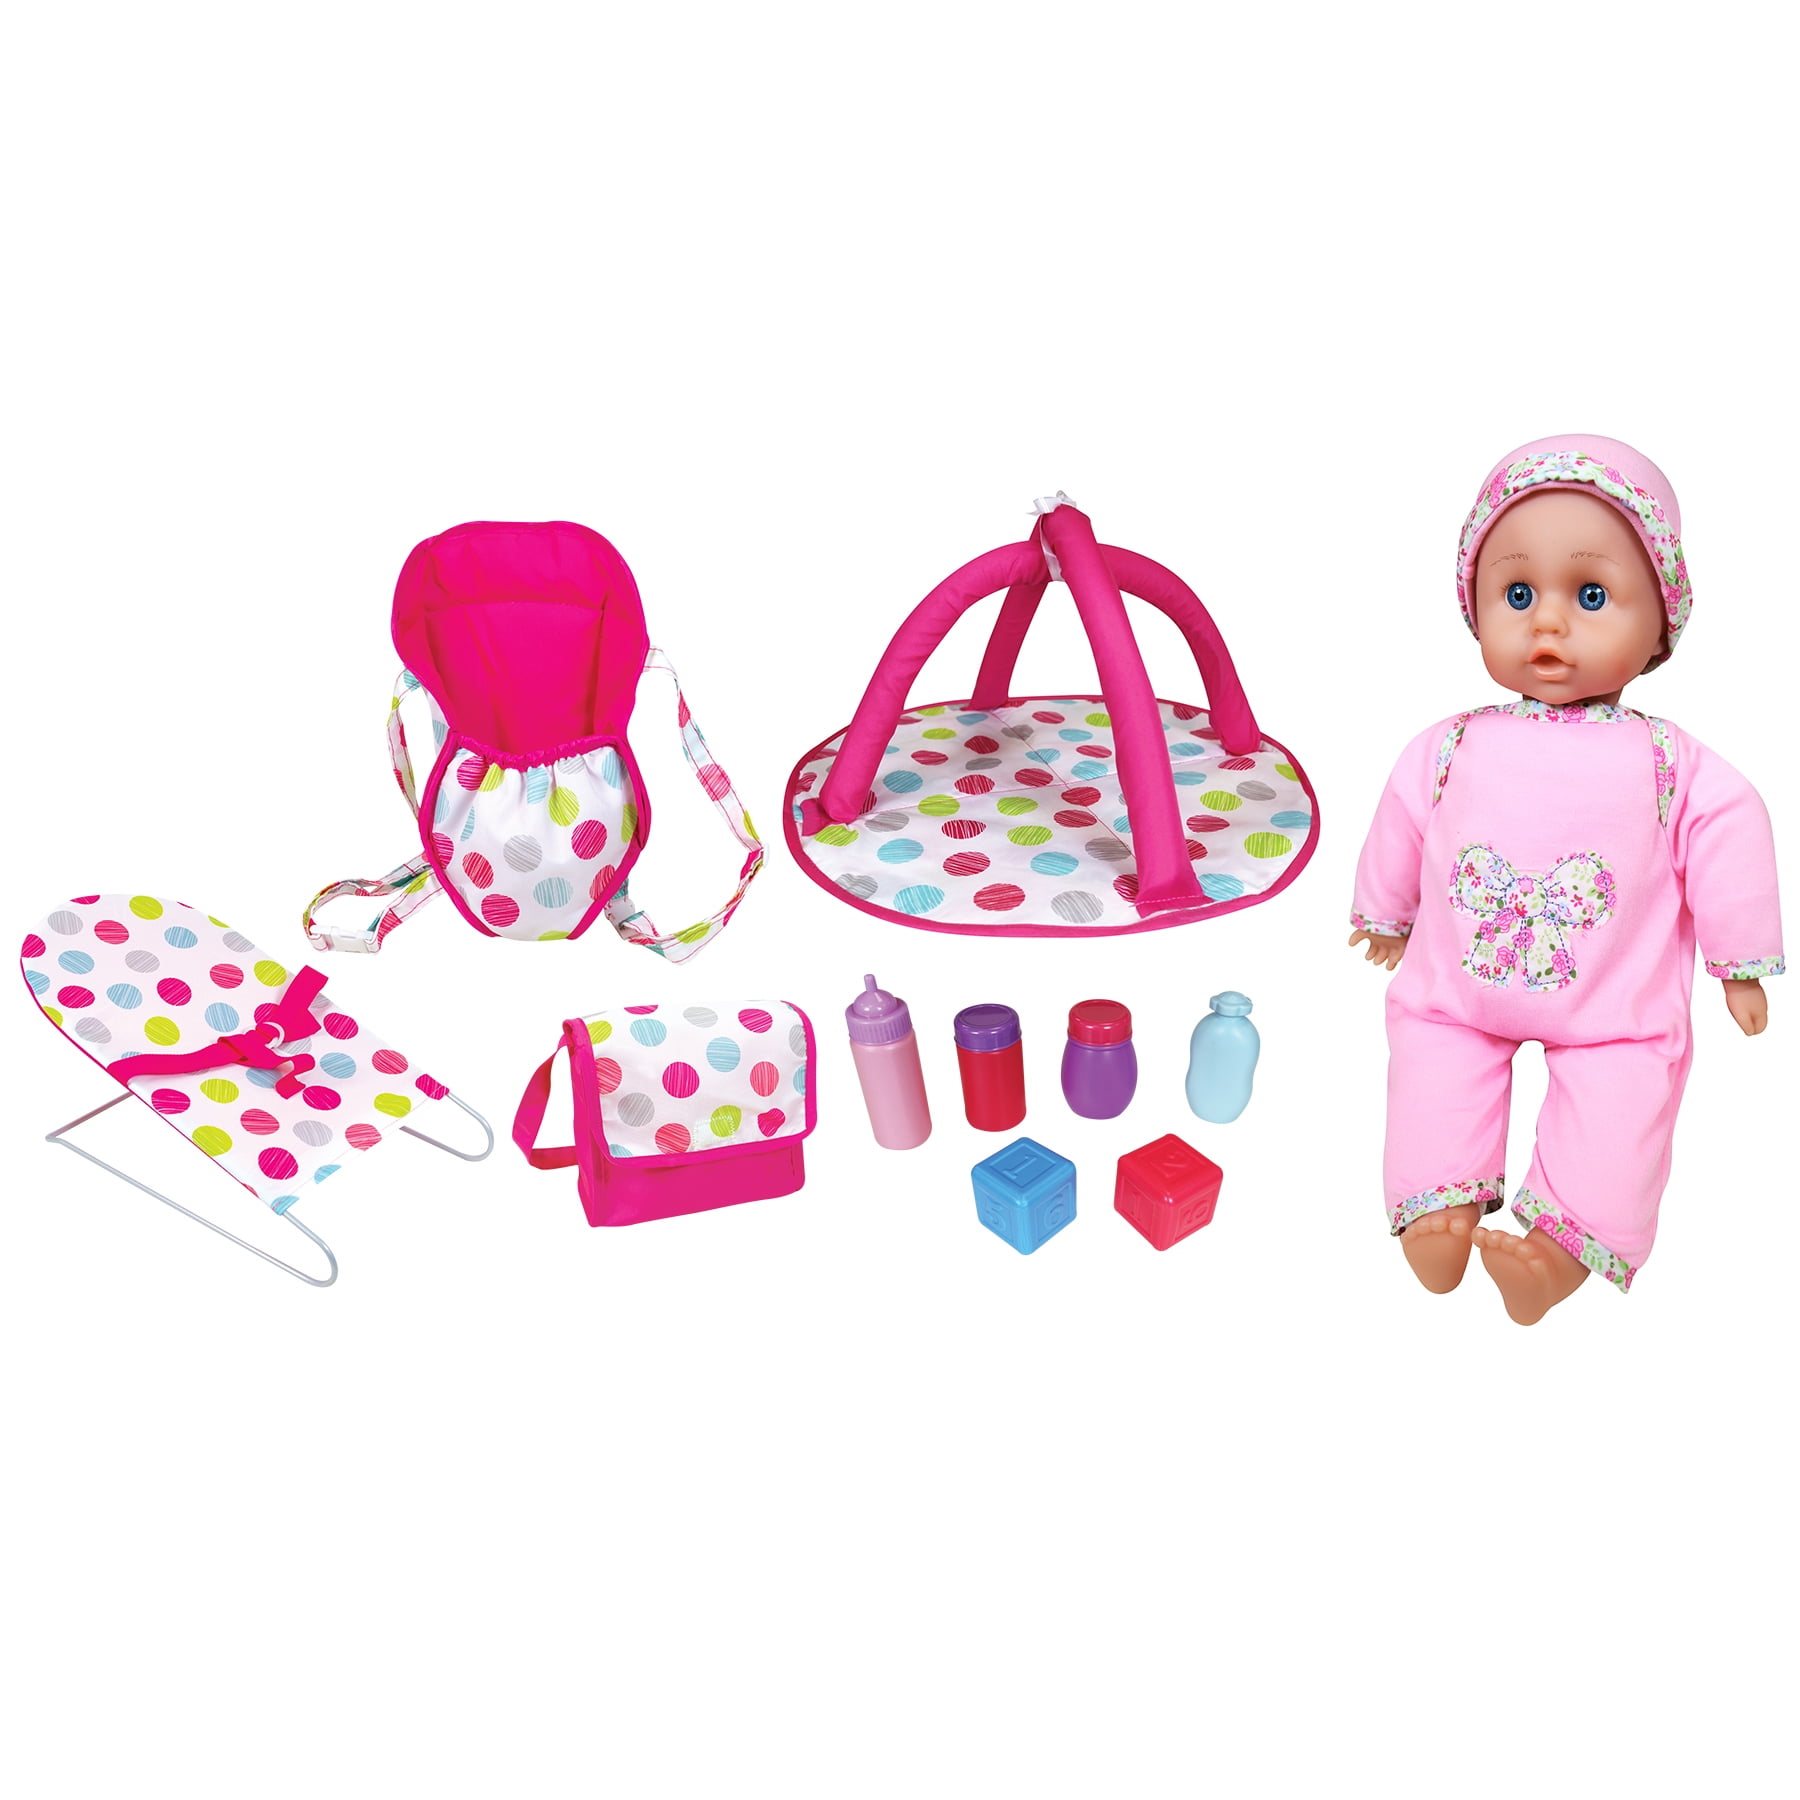 Zapf Creation Baby Born Doll Deluxe Toy Collection Range Playsets 